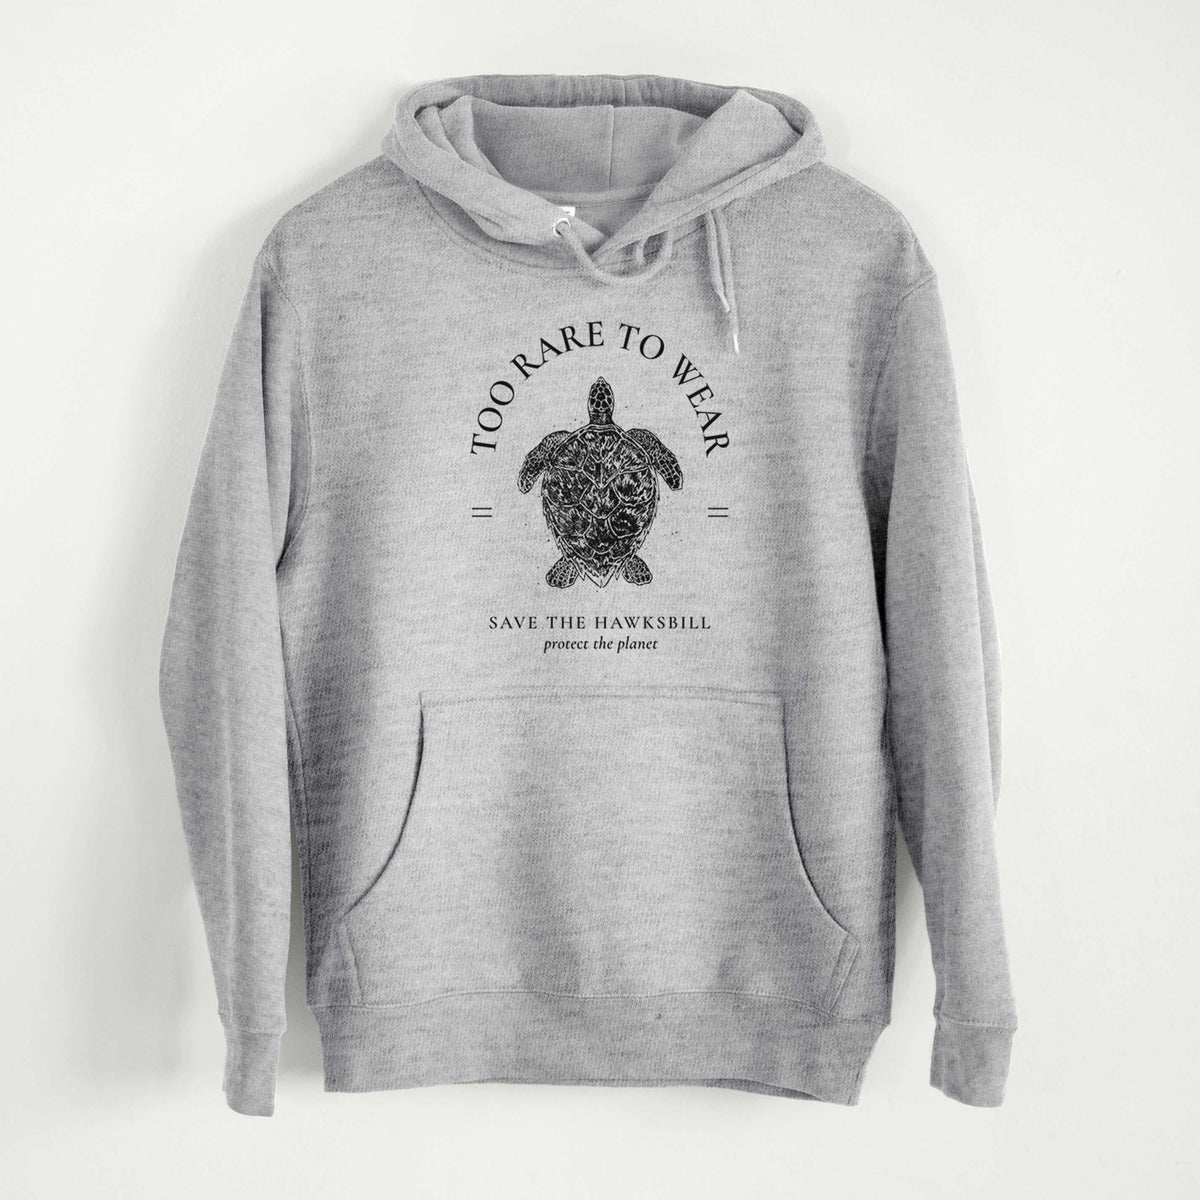 Too Rare to Wear - Save the Hawksbill  - Mid-Weight Unisex Premium Blend Hoodie